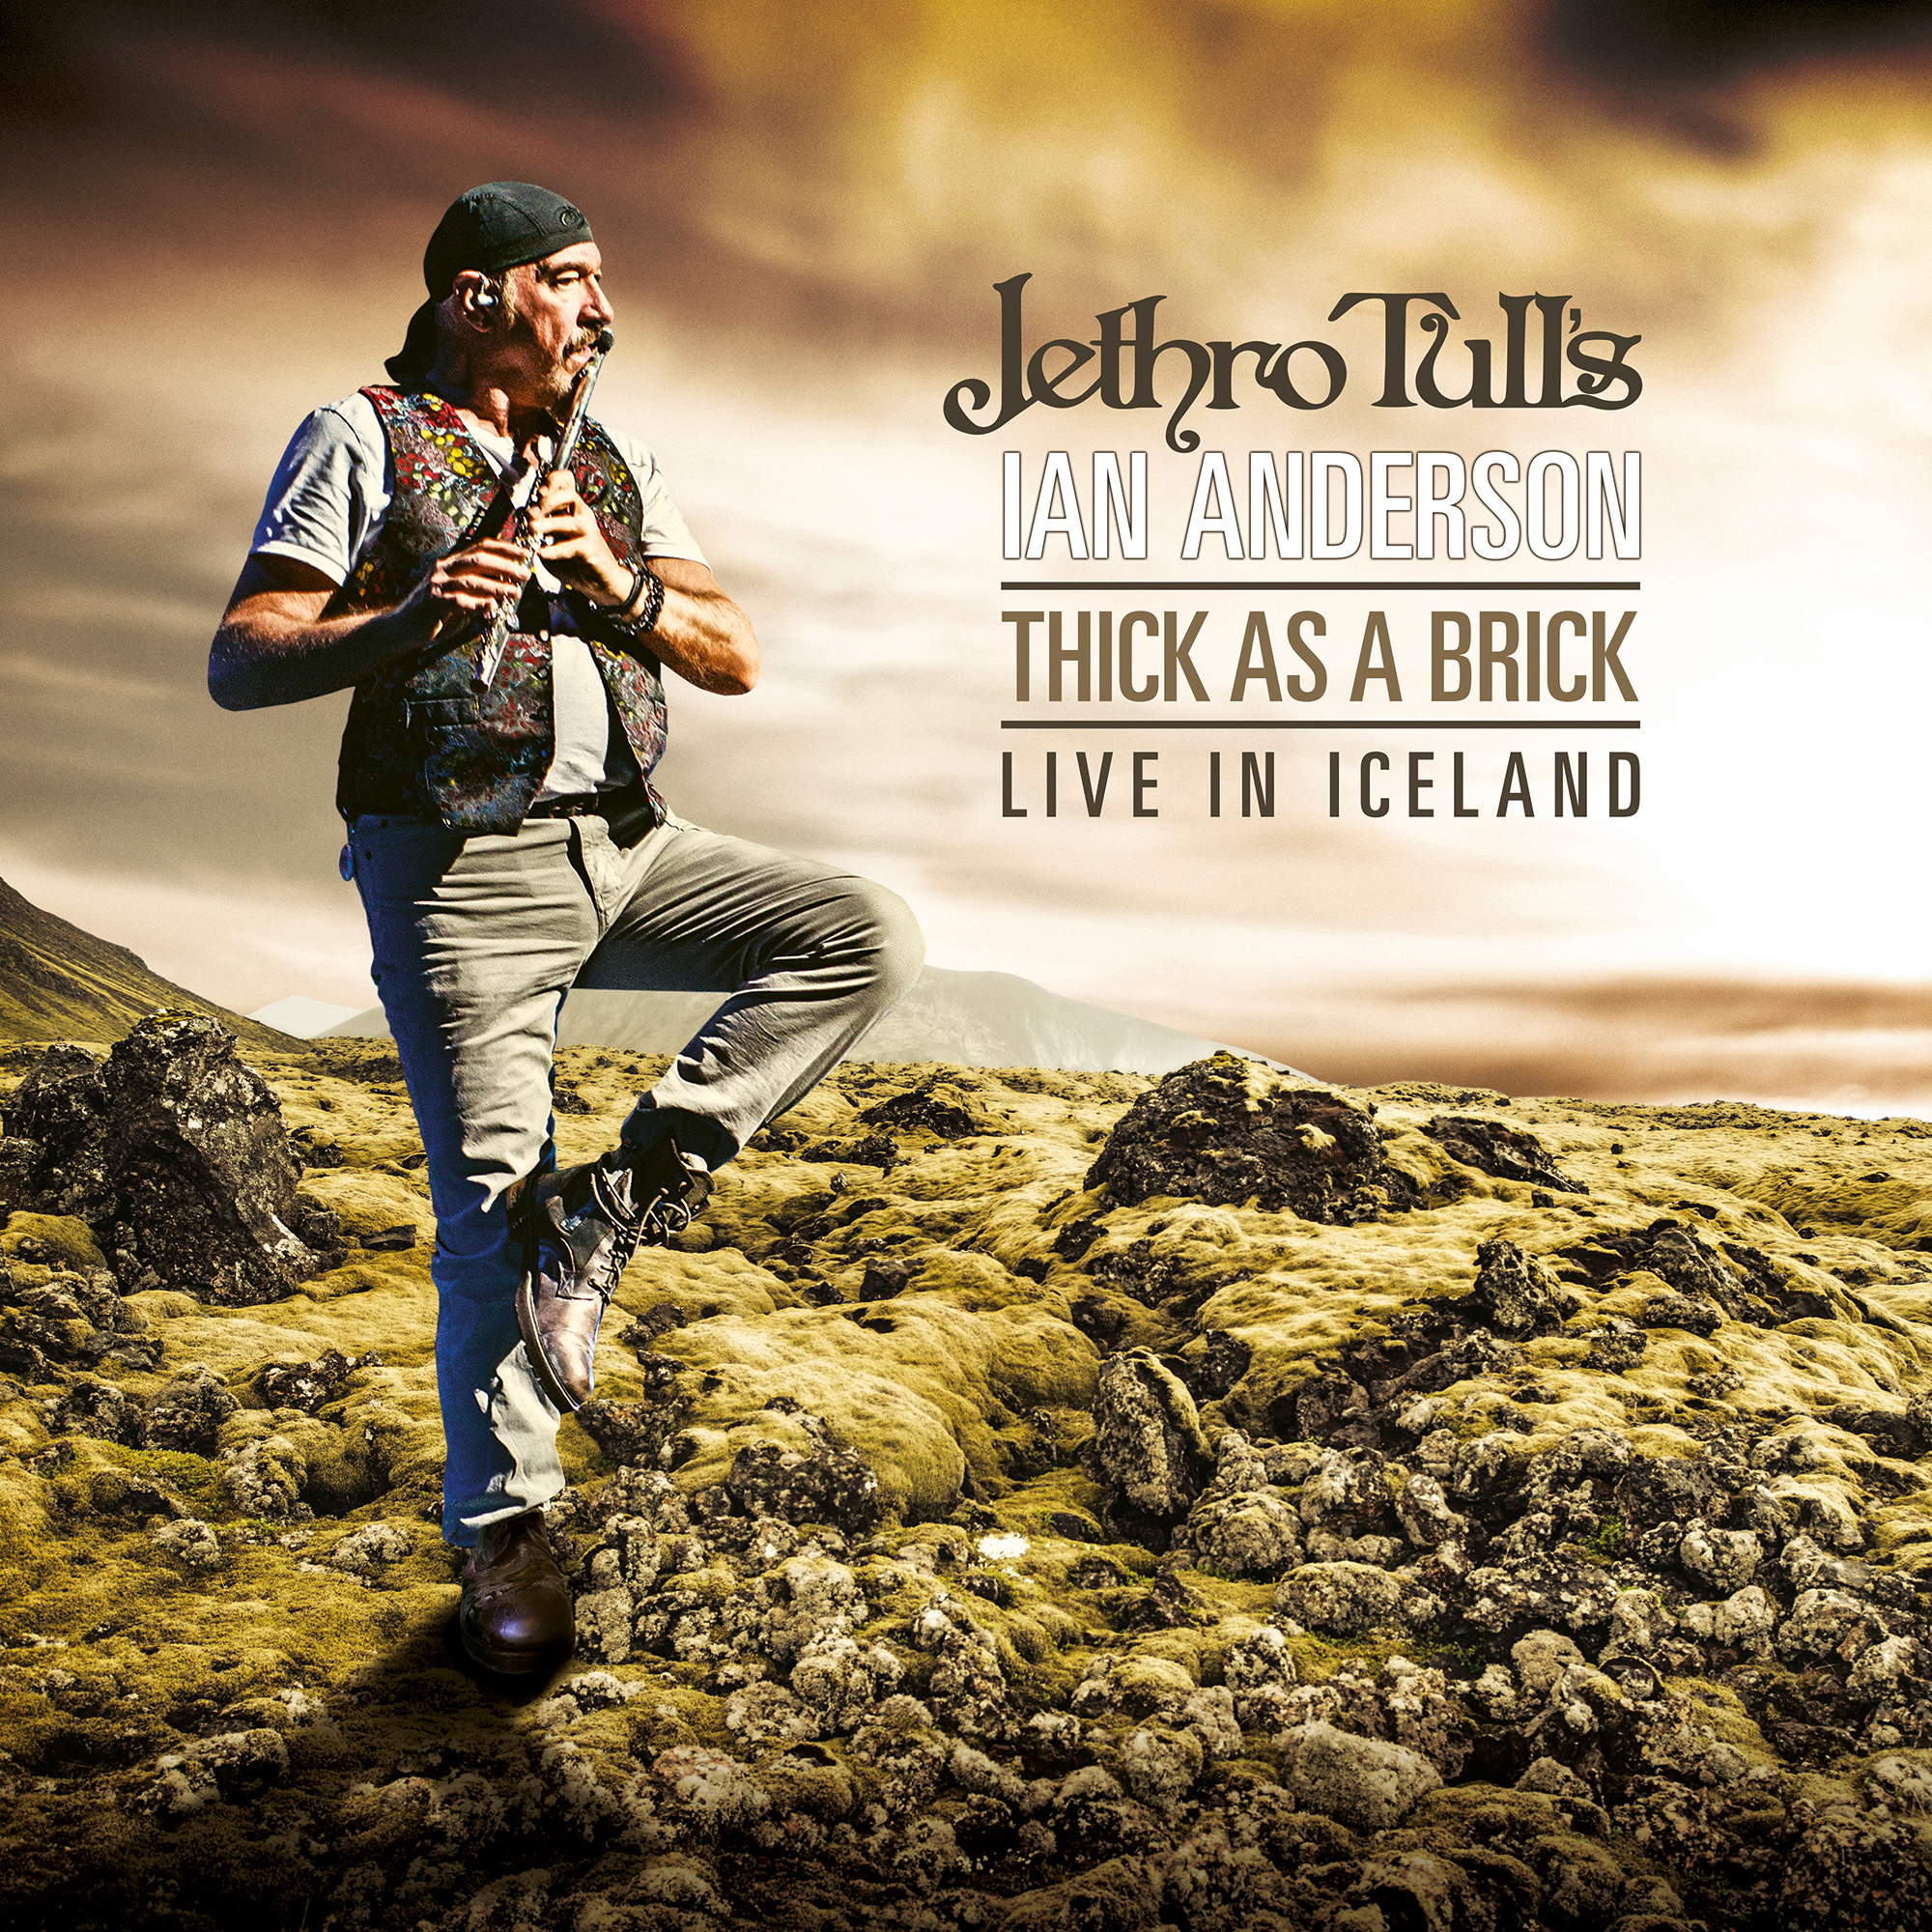 Jethro Tull's Ian Anderson - Thick As A Brick - Live In Iceland - 2xCD+DVD